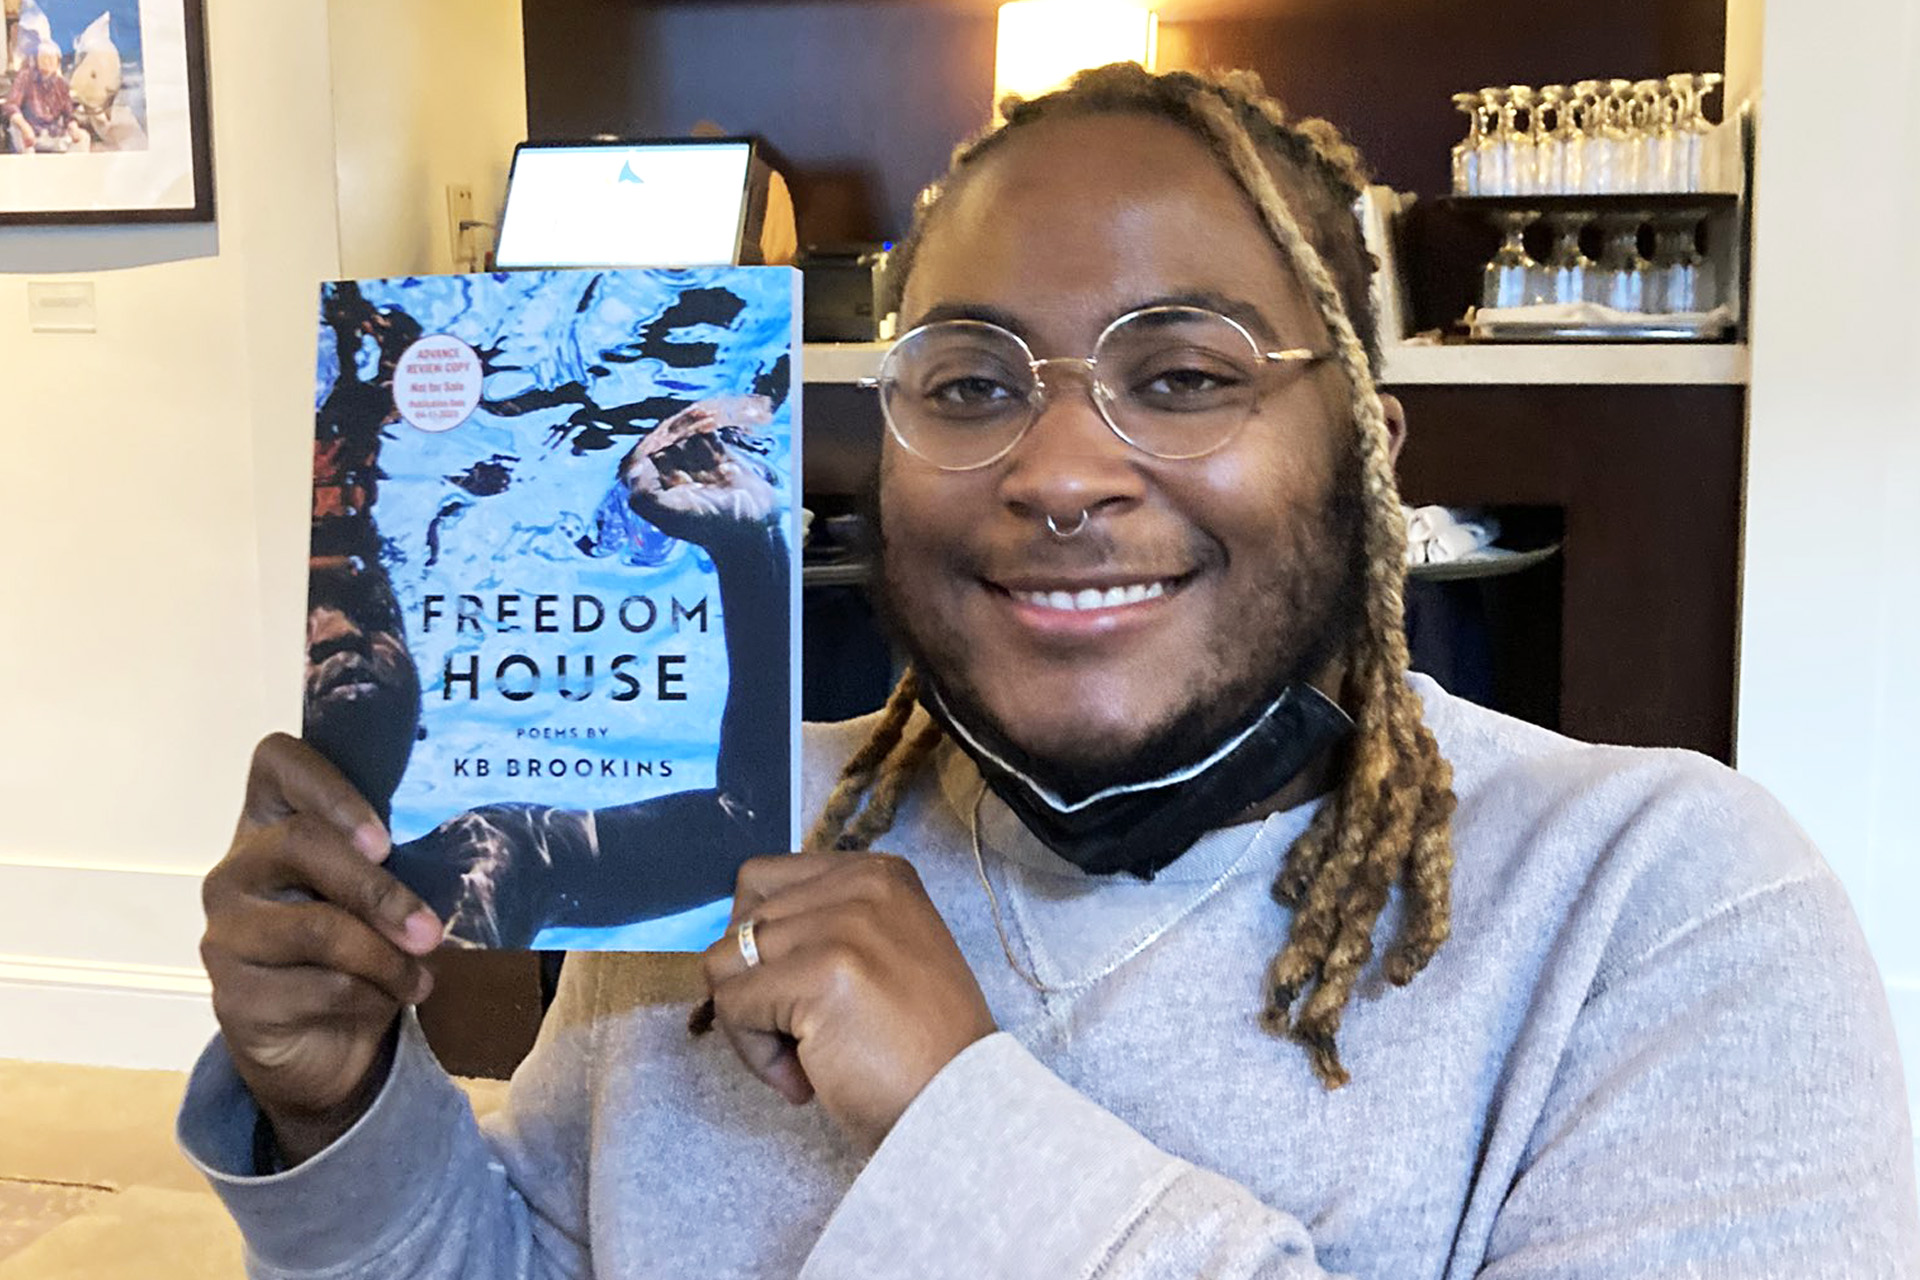 KB — a Black person with brown skin and blond braided locs -- proudly holds up their new book "Freedom House." KB is wearing a gray sweatshirt and round frame glasses. Location is in a residential setting. They are looking directly at the camera.